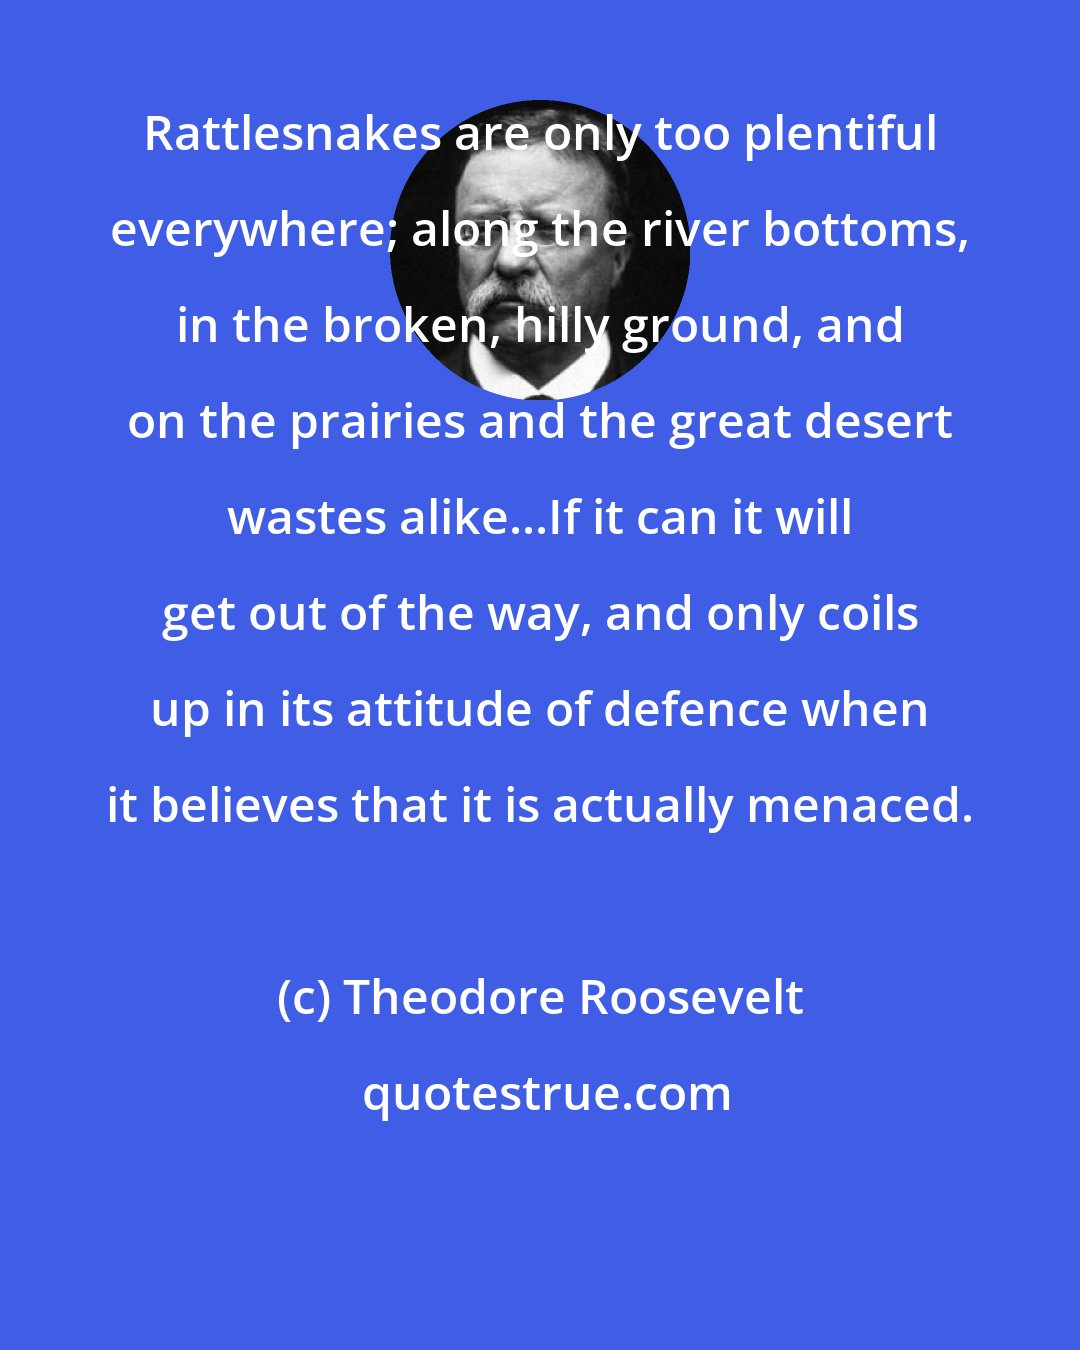 Theodore Roosevelt: Rattlesnakes are only too plentiful everywhere; along the river bottoms, in the broken, hilly ground, and on the prairies and the great desert wastes alike...If it can it will get out of the way, and only coils up in its attitude of defence when it believes that it is actually menaced.